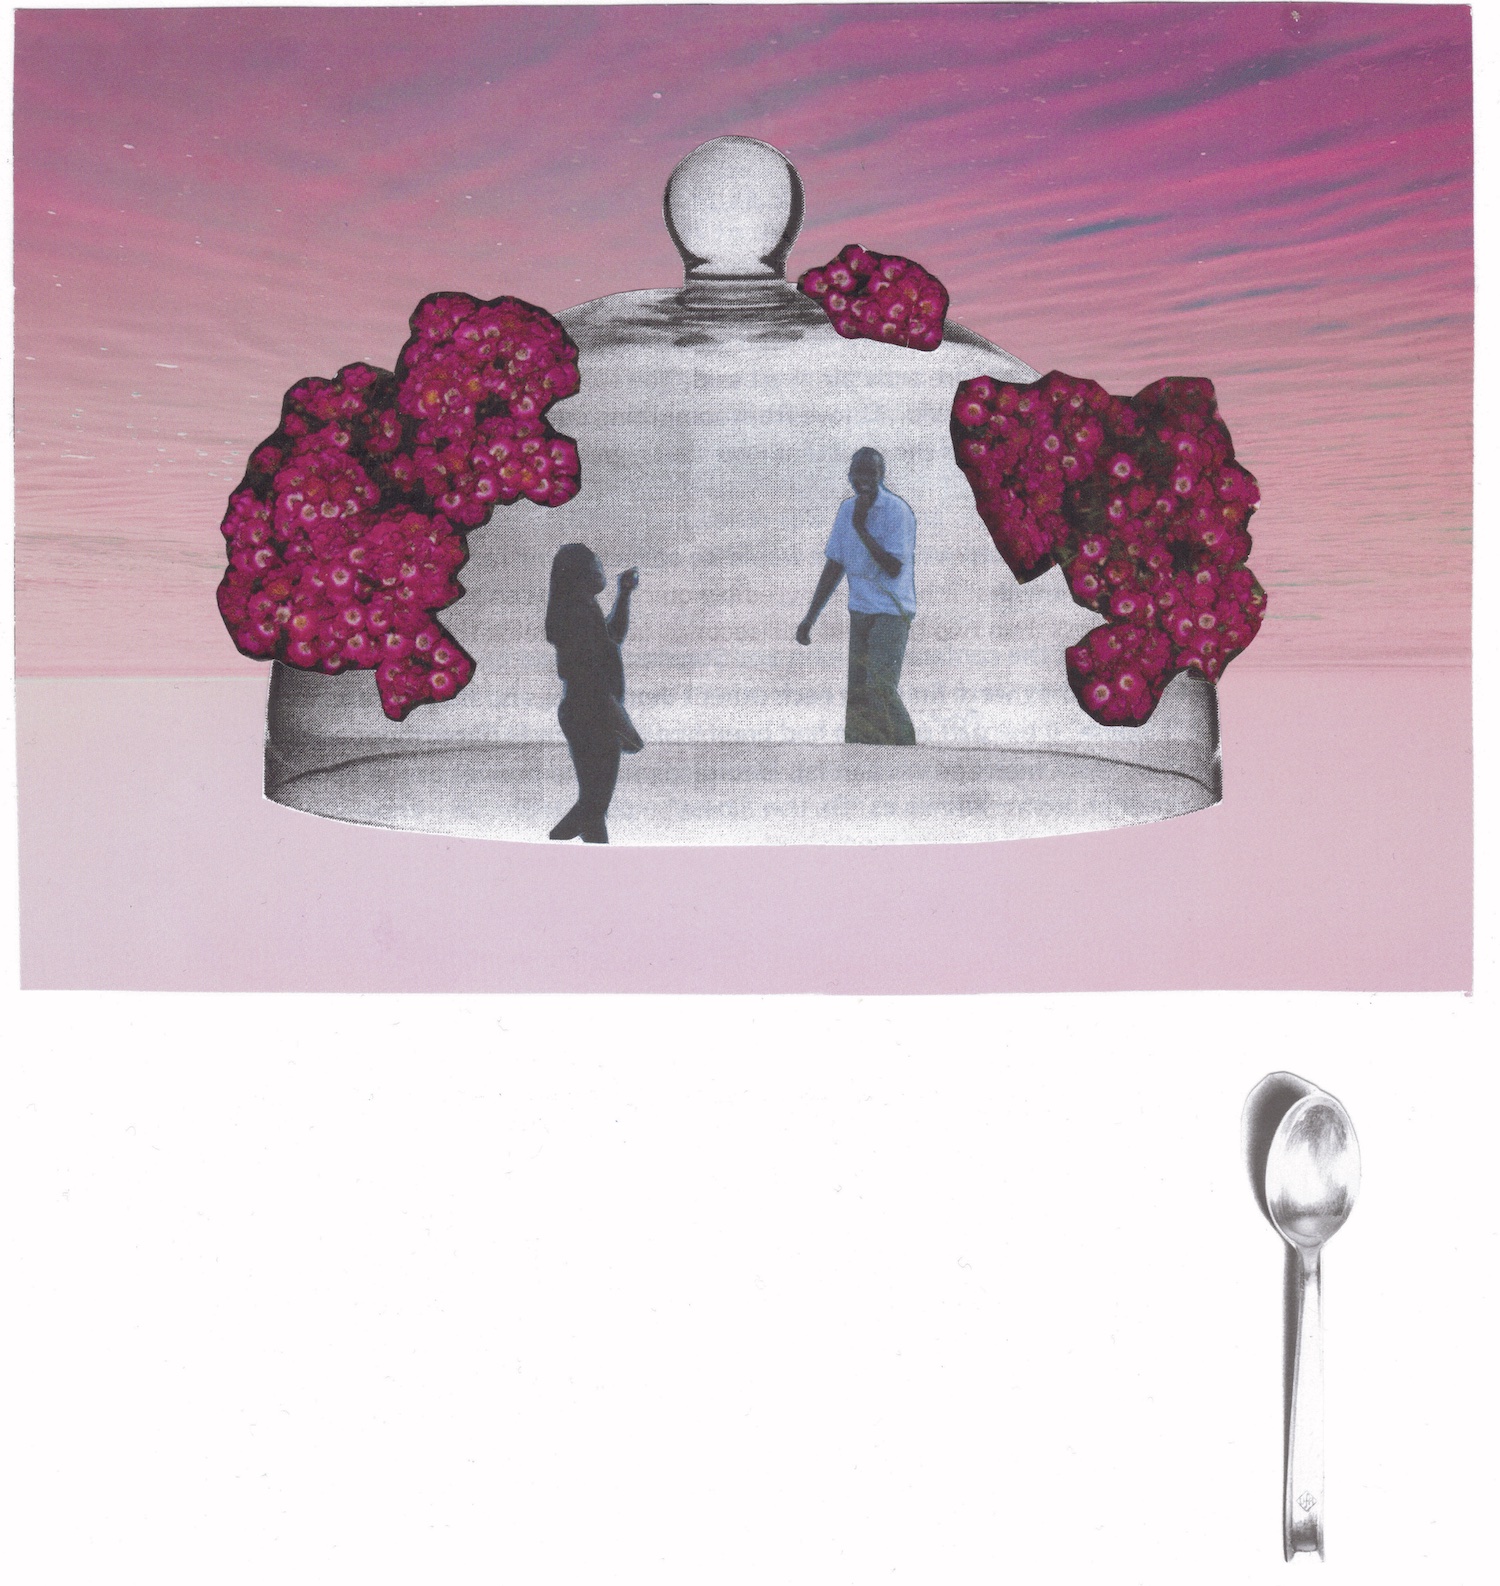 Two figures catch a glimpse of each other as they walk in opposite directions. Encircled by a glass dome, the surface of which is sprouting hot pink flowers. In the background an image with the appearance of a sunset or an upside down, hot pink seascape. Below the dome, a single teaspoon is laid out.